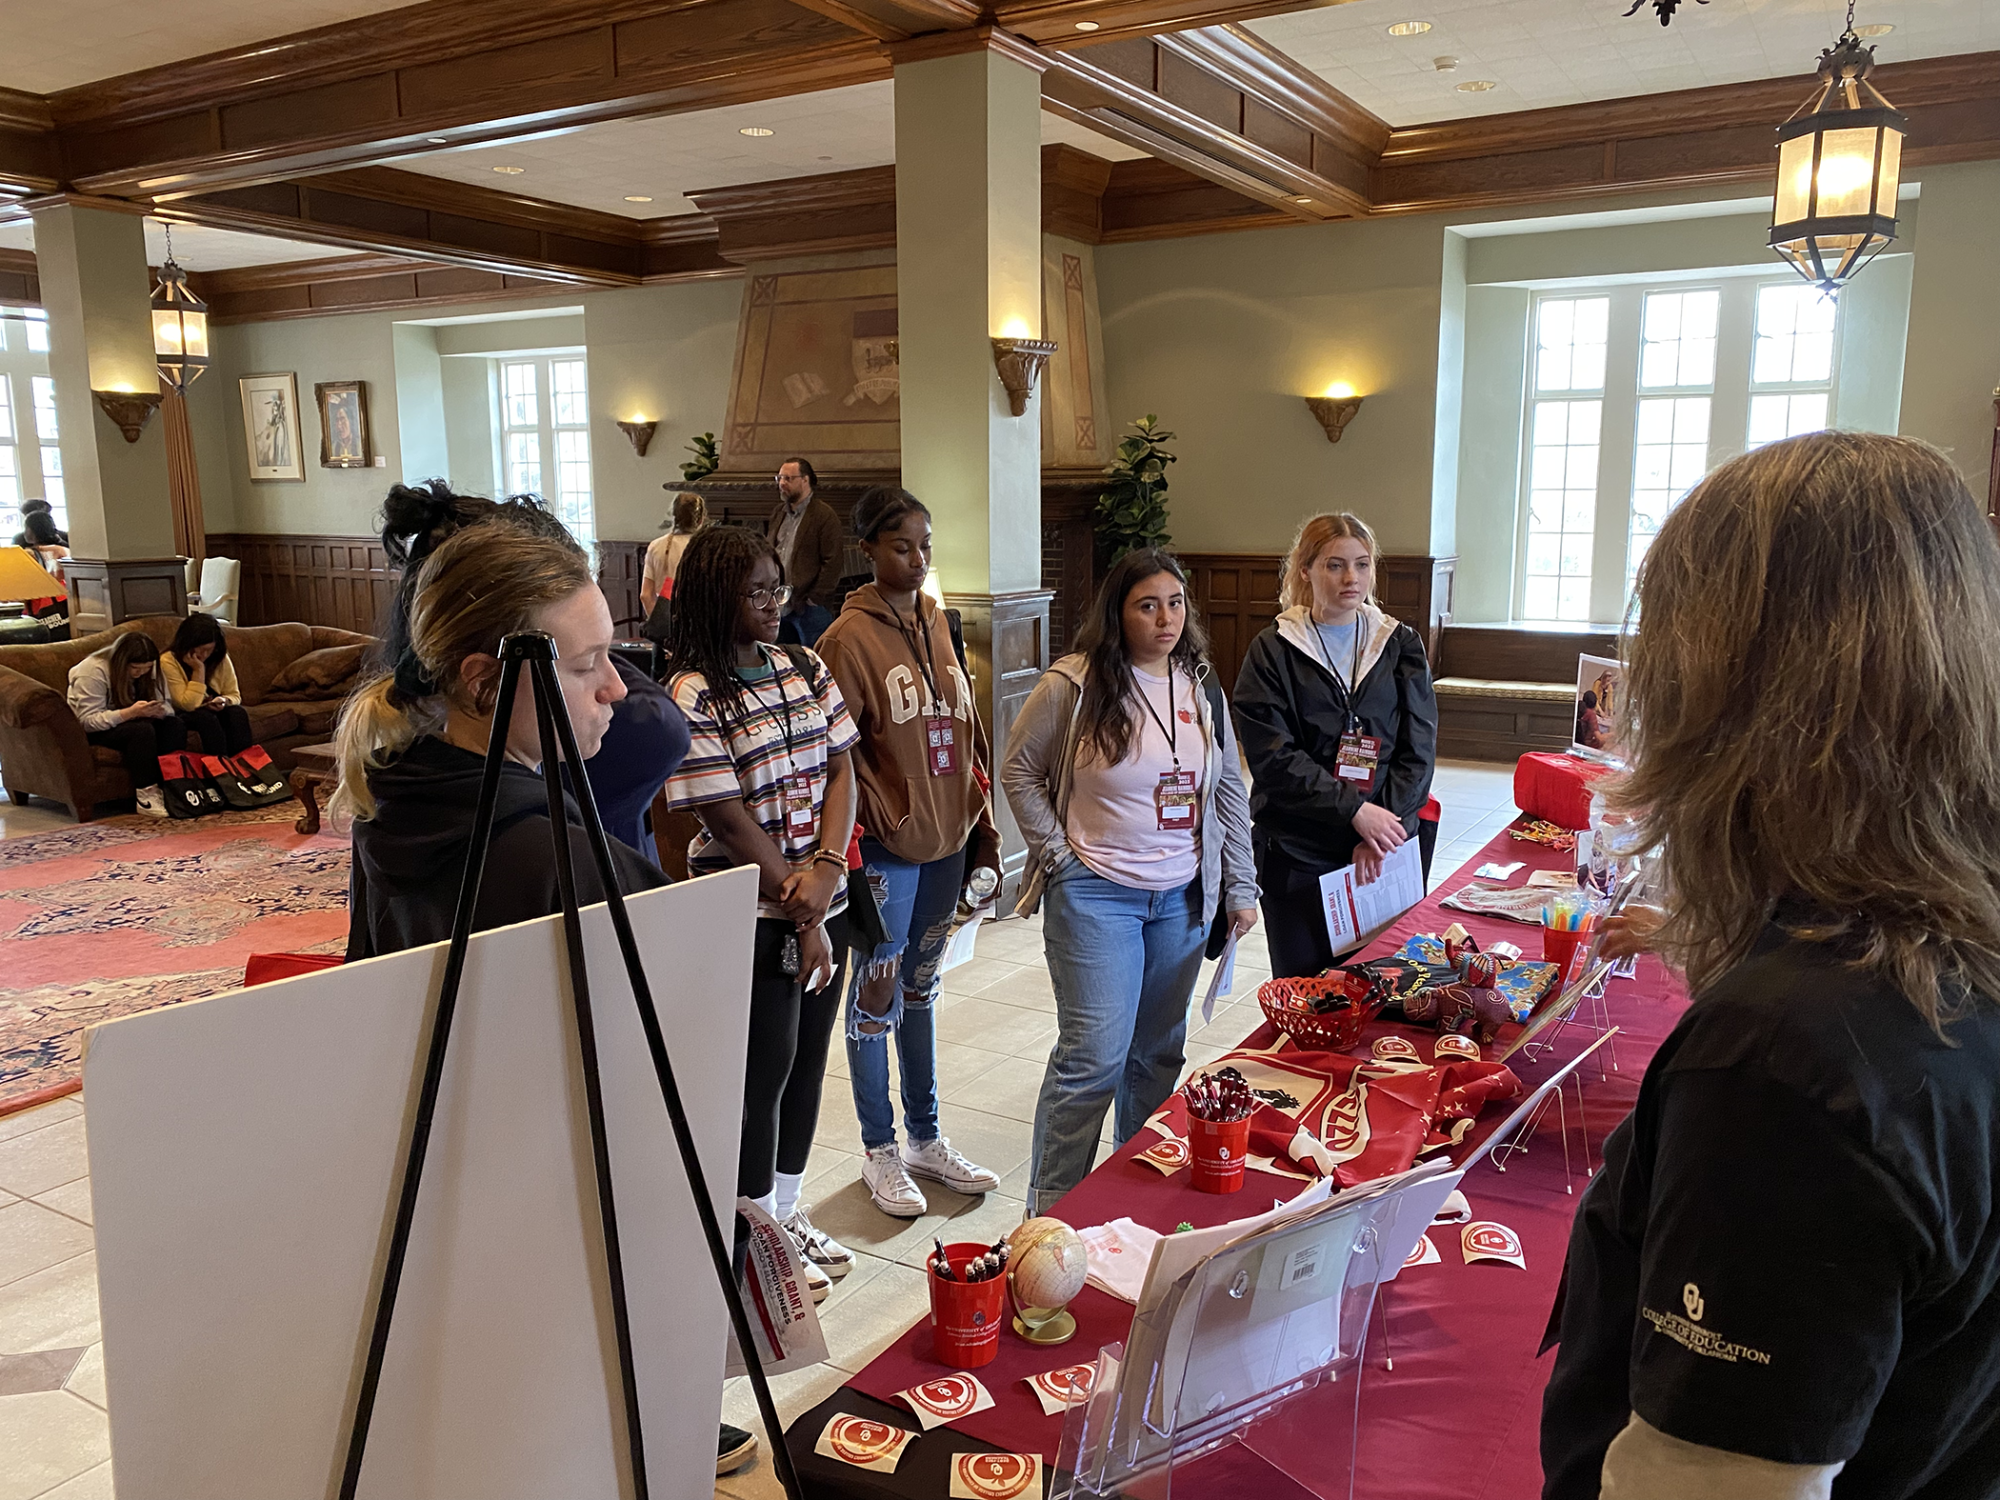 Students in an open room standing in front of a table with a crimson table cloth while a woman speaks to them